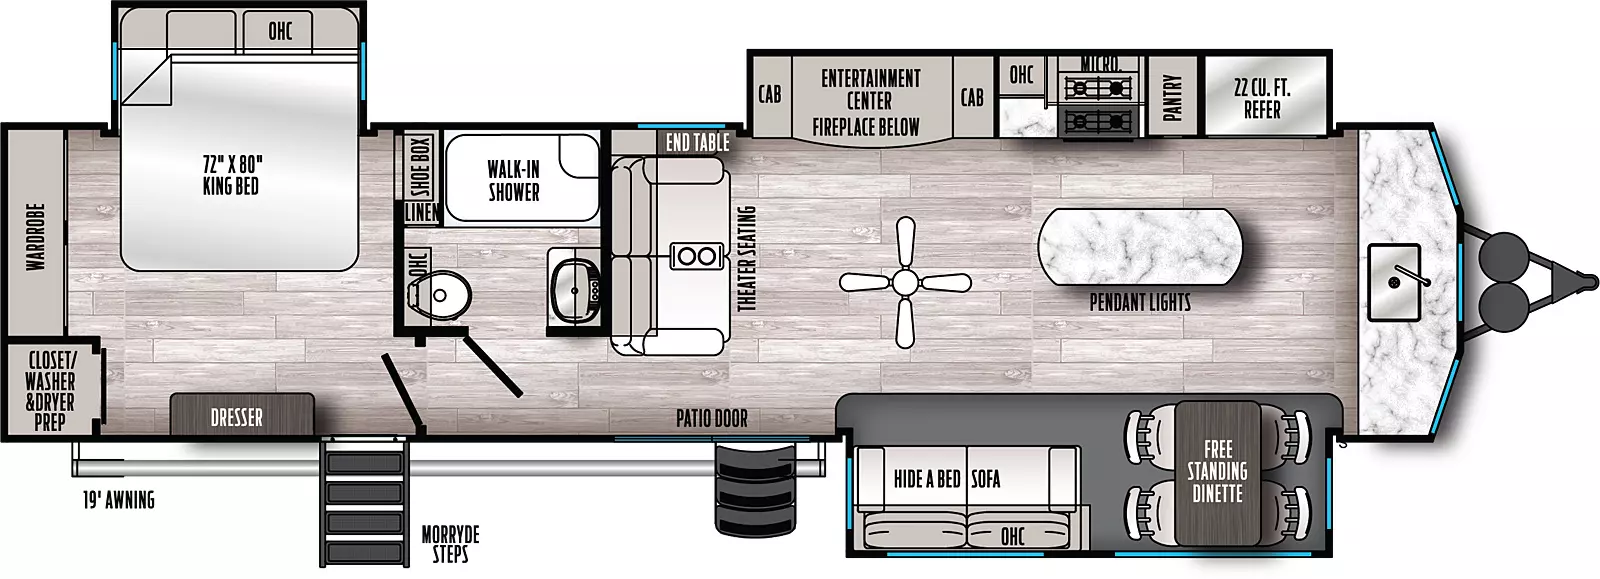 The 402FK has three slides and two entries. Exterior features a 19 foot awning and MORryde steps. Interior layout front to back: front kitchen counter with sink; paddle fan and kitchen island with pendant lights; off-door side slideout with 22 cubic foot refrigerator, pantry, microwave, cooktop, oven, overhead cabinets, and entertainment center with fireplace below and cabinets on either side; door side slideout with free-standing dinette and hide-a-bed sofa with overhead cabinets; theater seating with end table and overhead cabinets on interior wall; patio door entry; off-door side aisle full bathroom with walk-in shower and linen cabinet; rear bedroom with second entry, door side dresser, off-door side king bed slideout with overhead cabinets, shoe box storage, and rear wardrobe and closet with washer/dryer prep.
